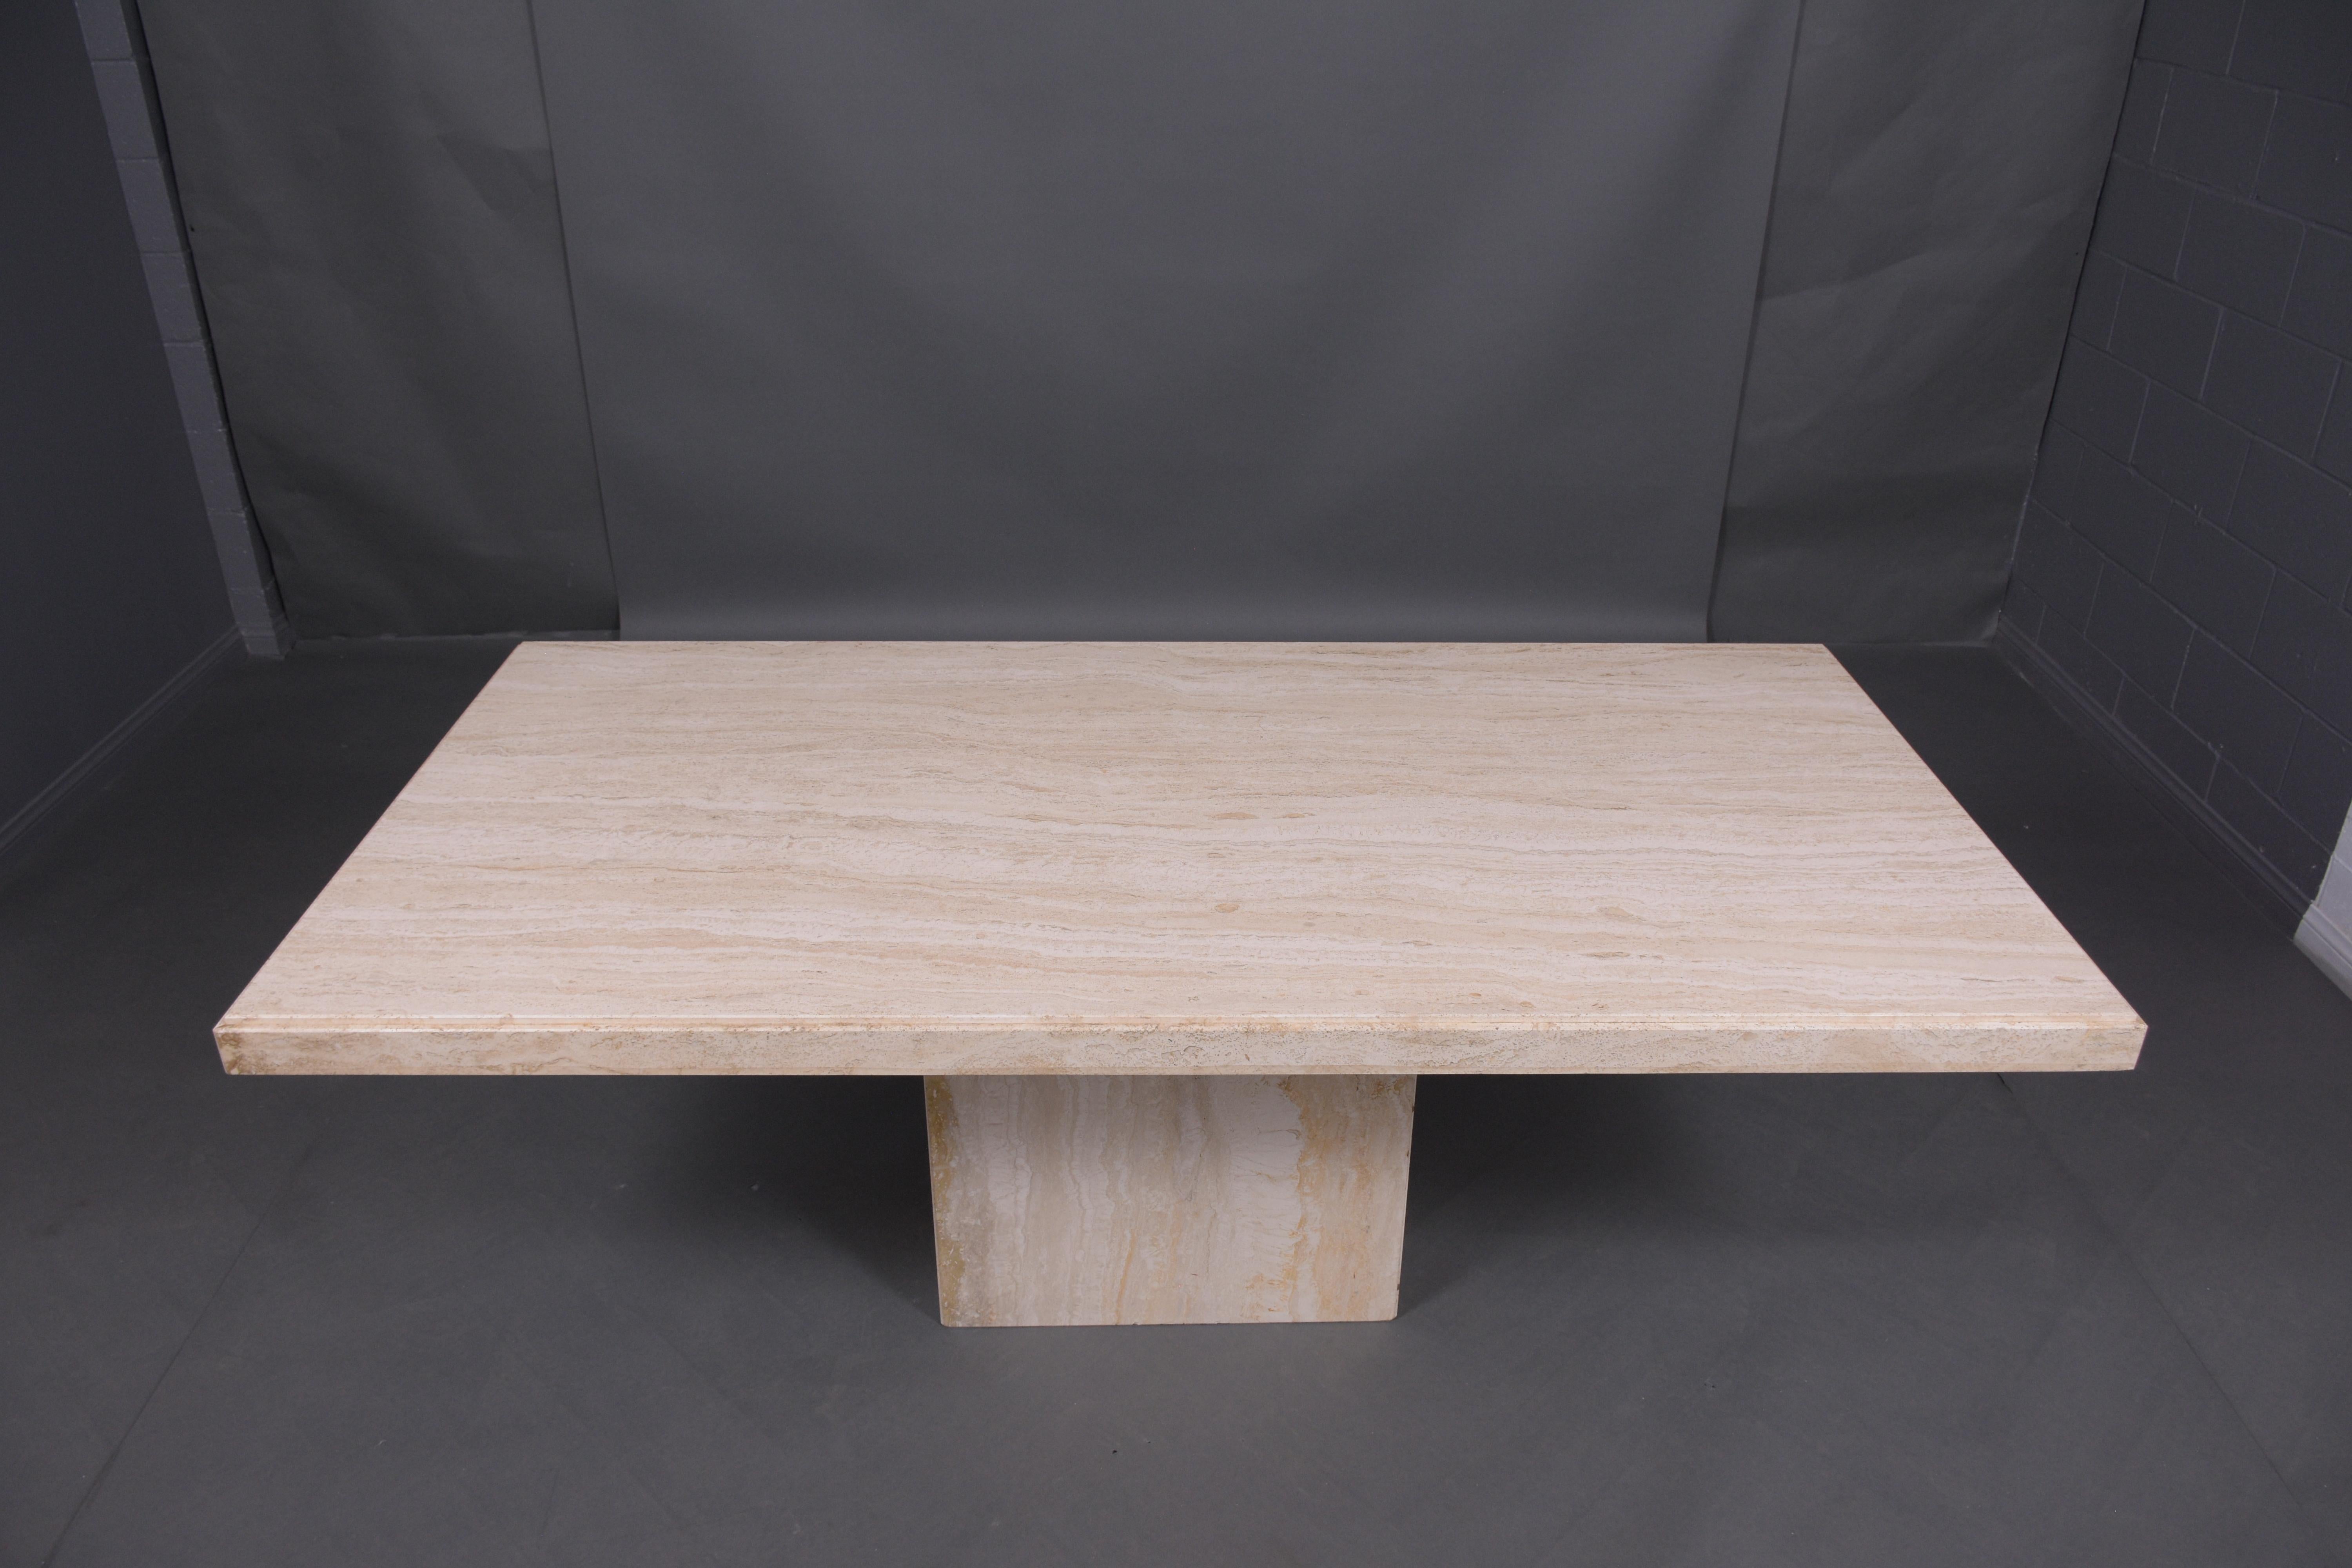 An extraordinary 1970s dining room table hand-crafted out of travertine marble stone. This table has an eye-catching feature large rectangular shape top with an uprising around the edges and seats on a floating base, This minimalist dining marble